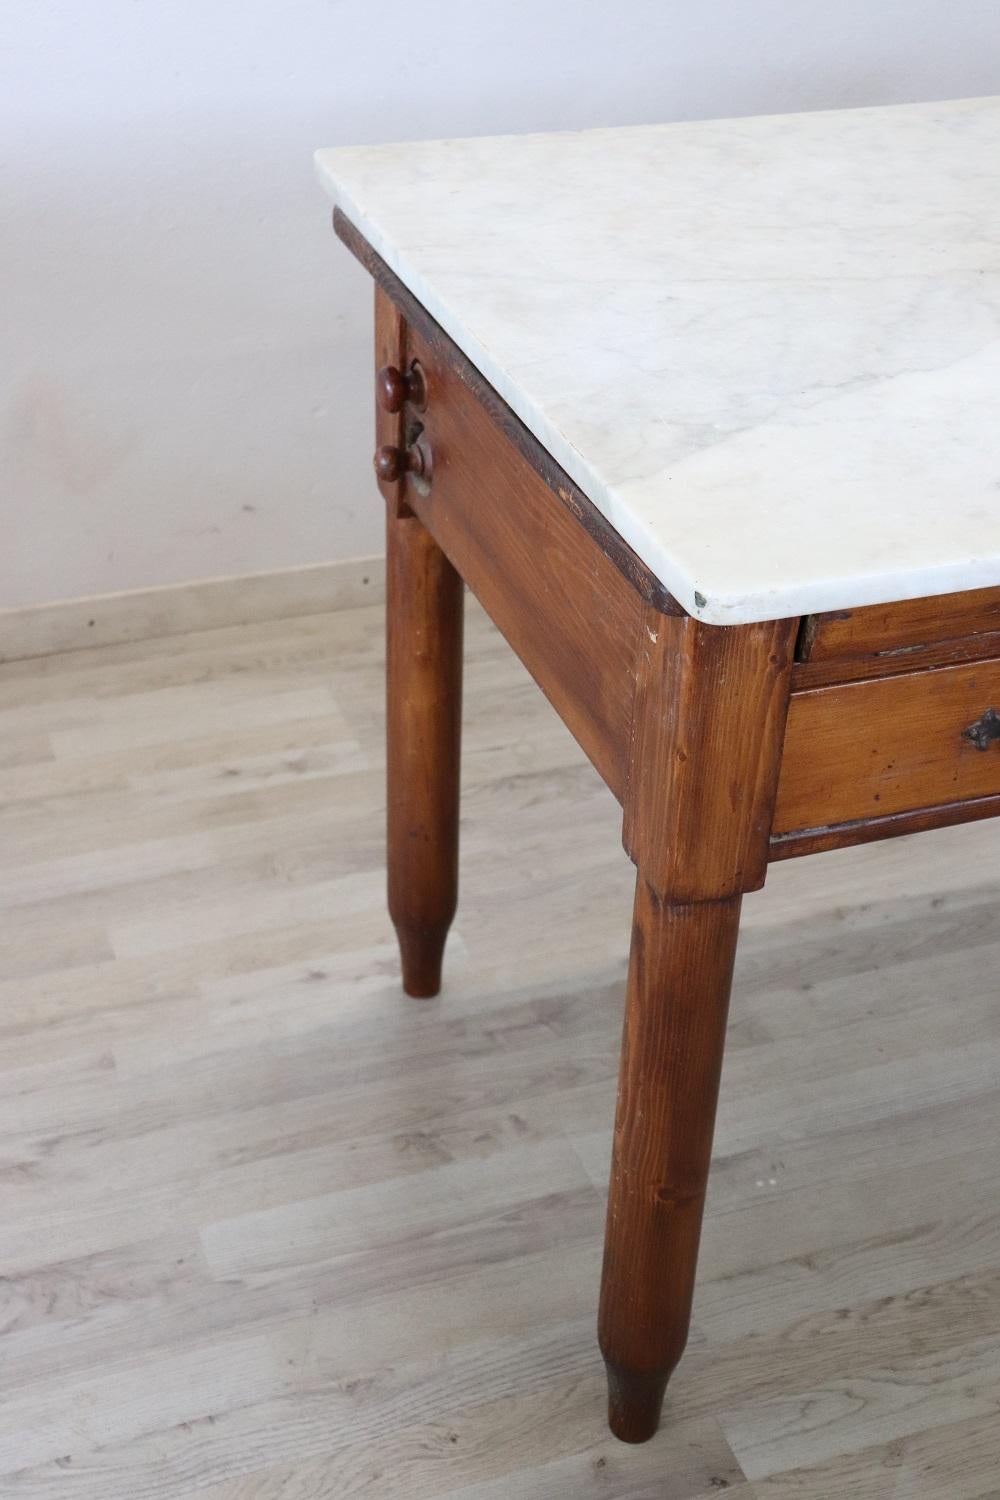 Beautiful very nice Italian fir wood kitchen table, 1930s with marble top. The table is equipped with many accessories necessary for the preparation of pasta. This type of table was used in the early 1900s by Italian women who loved cooking and